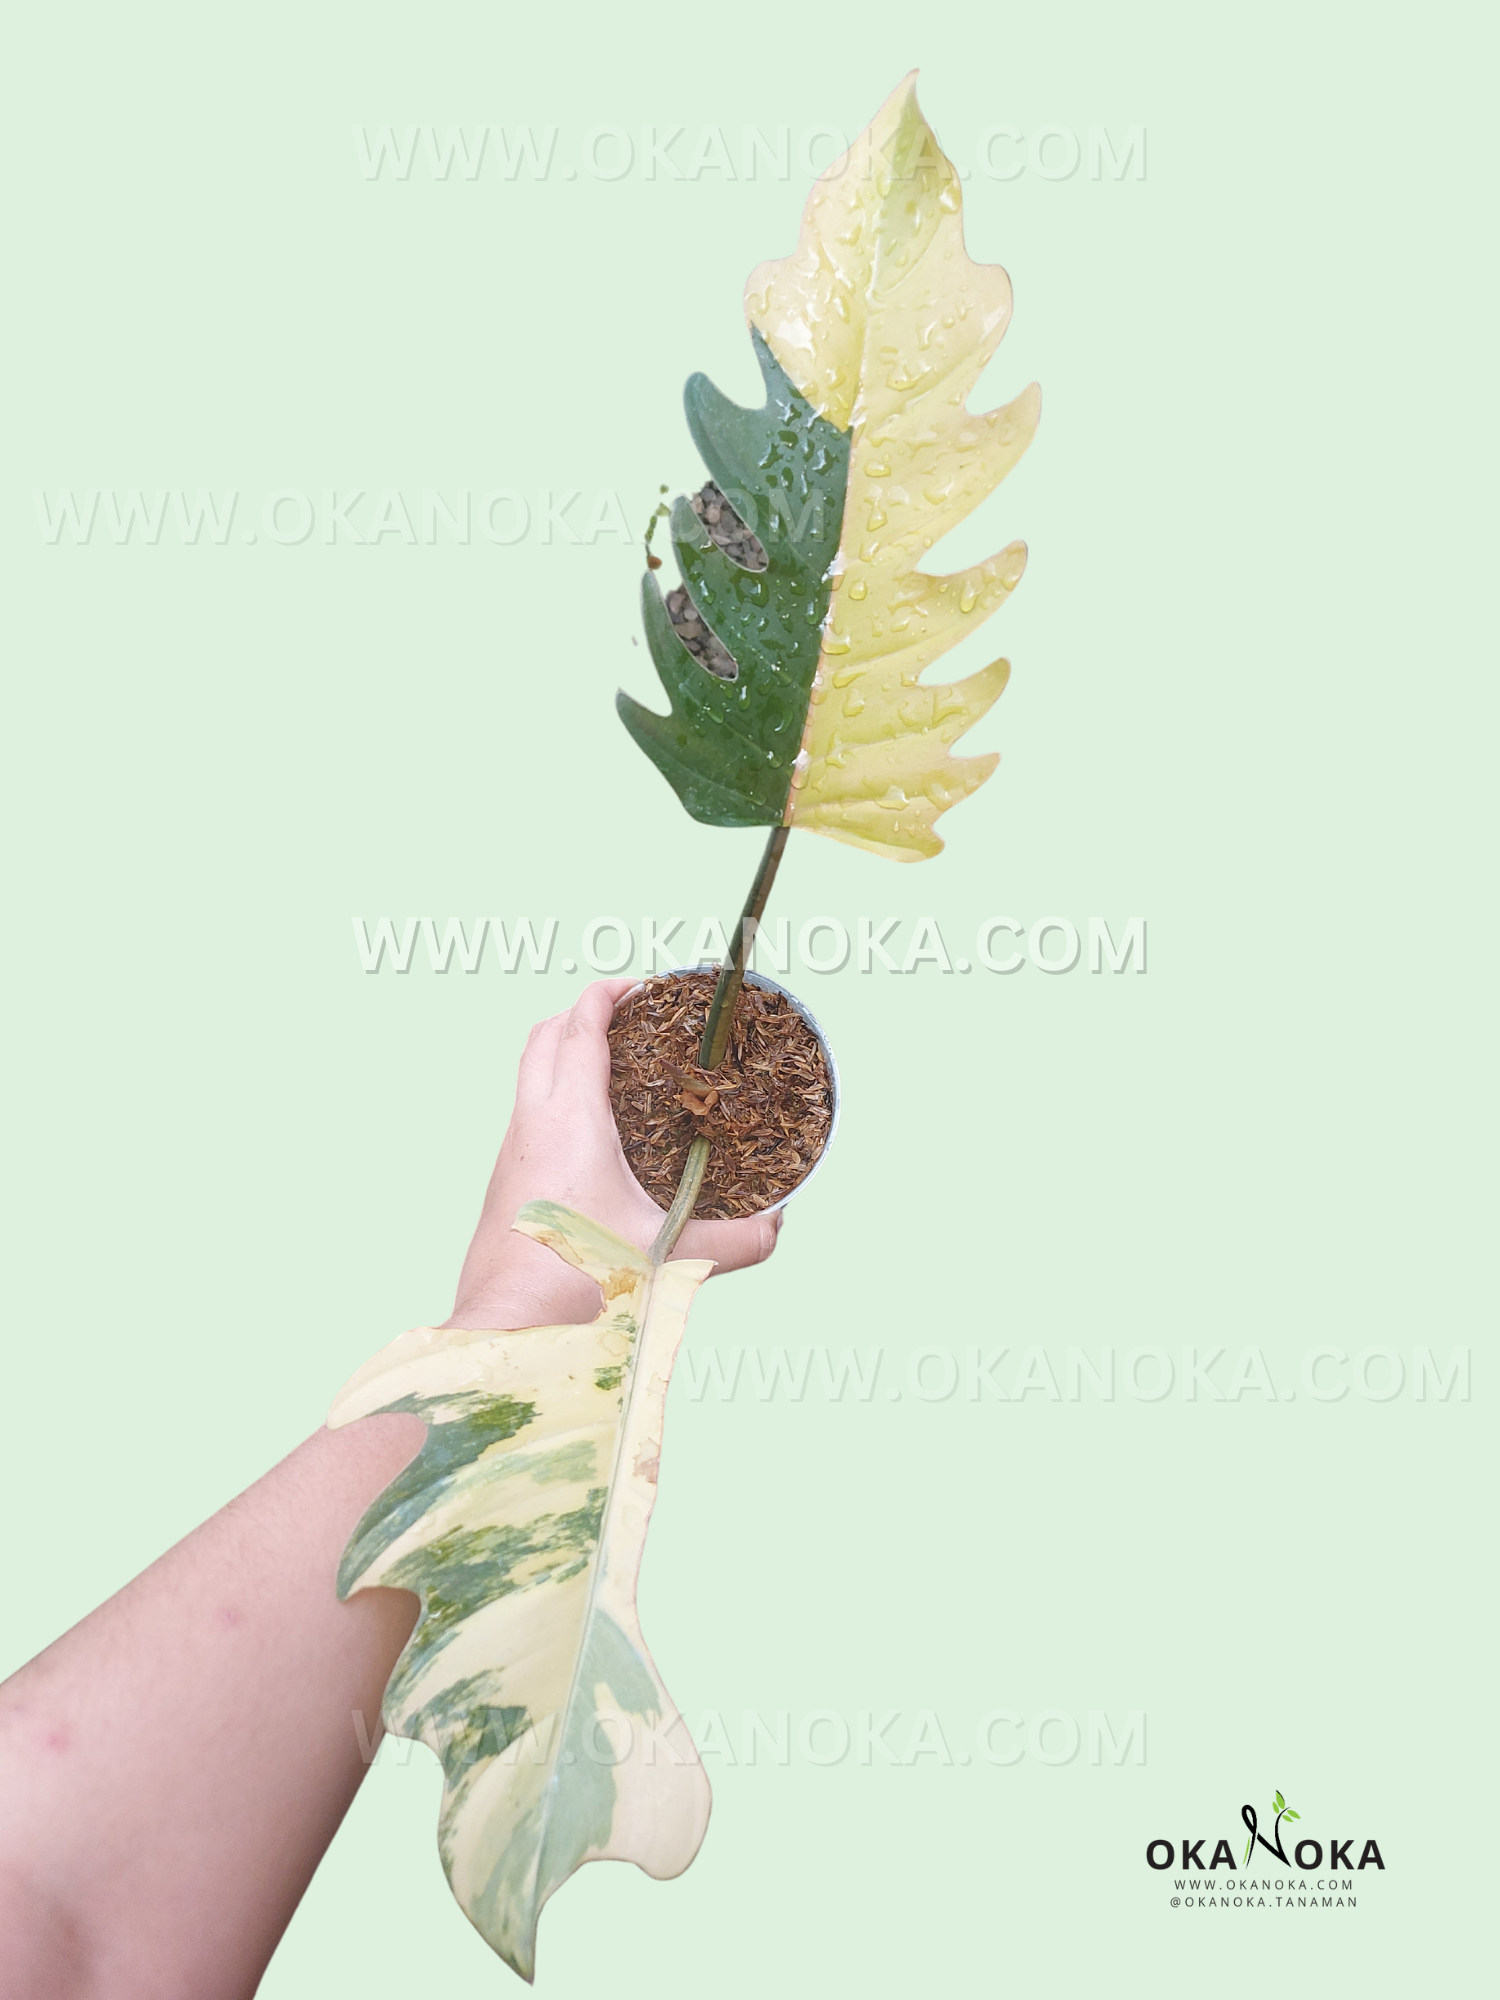 Rooted Cutting Philodendron Caramel Marble Variegated